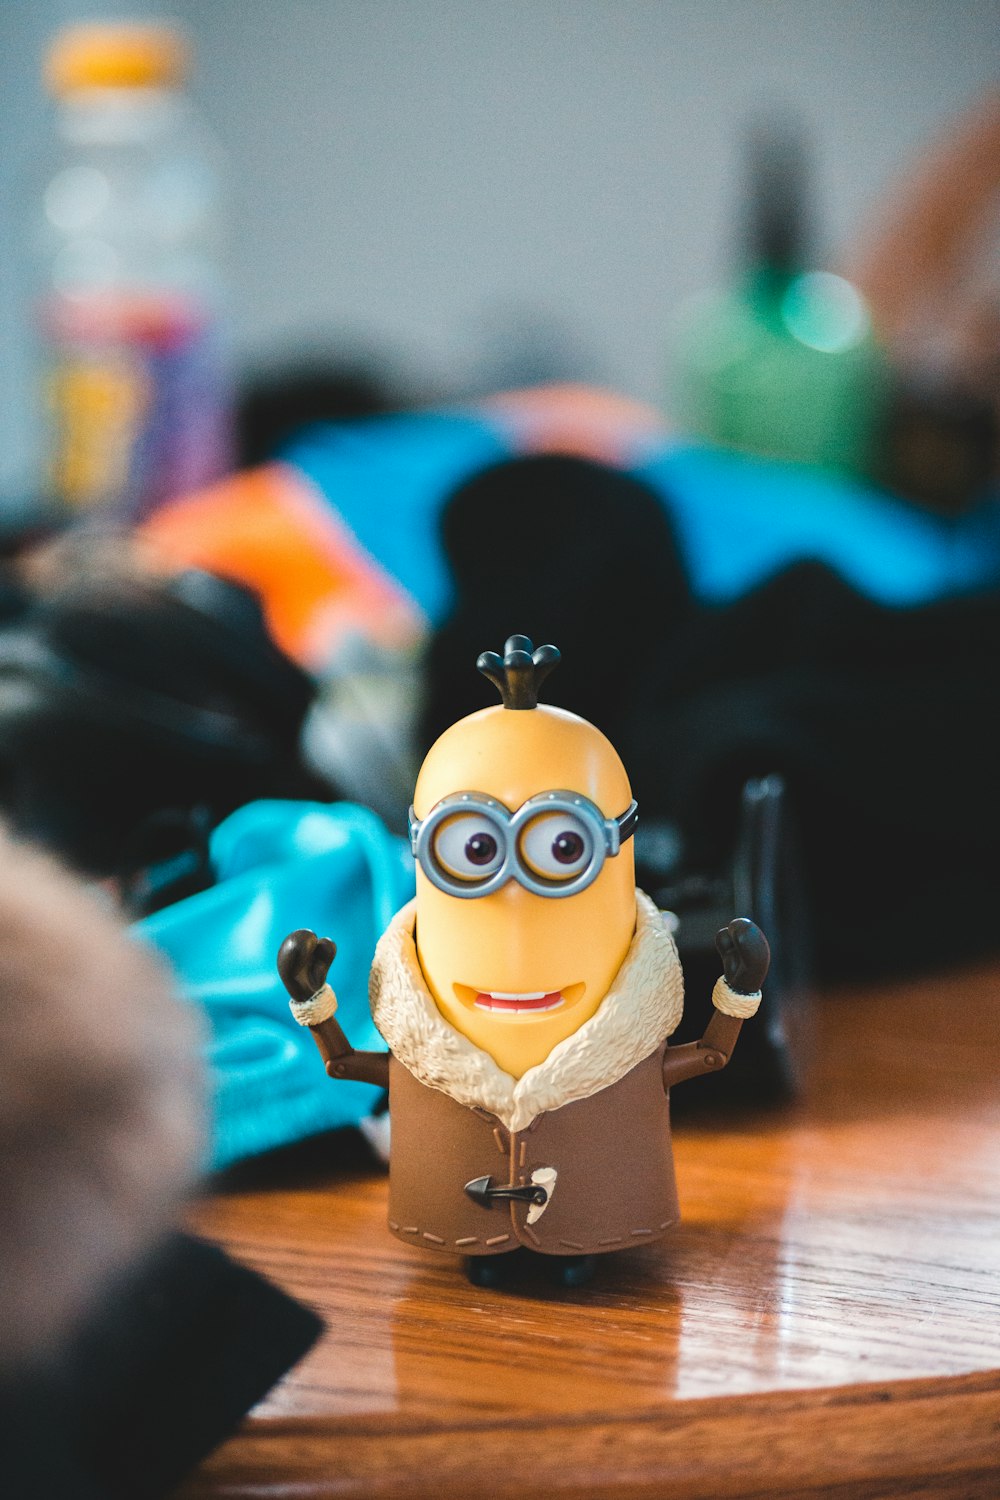 minion toy on brown wooden table